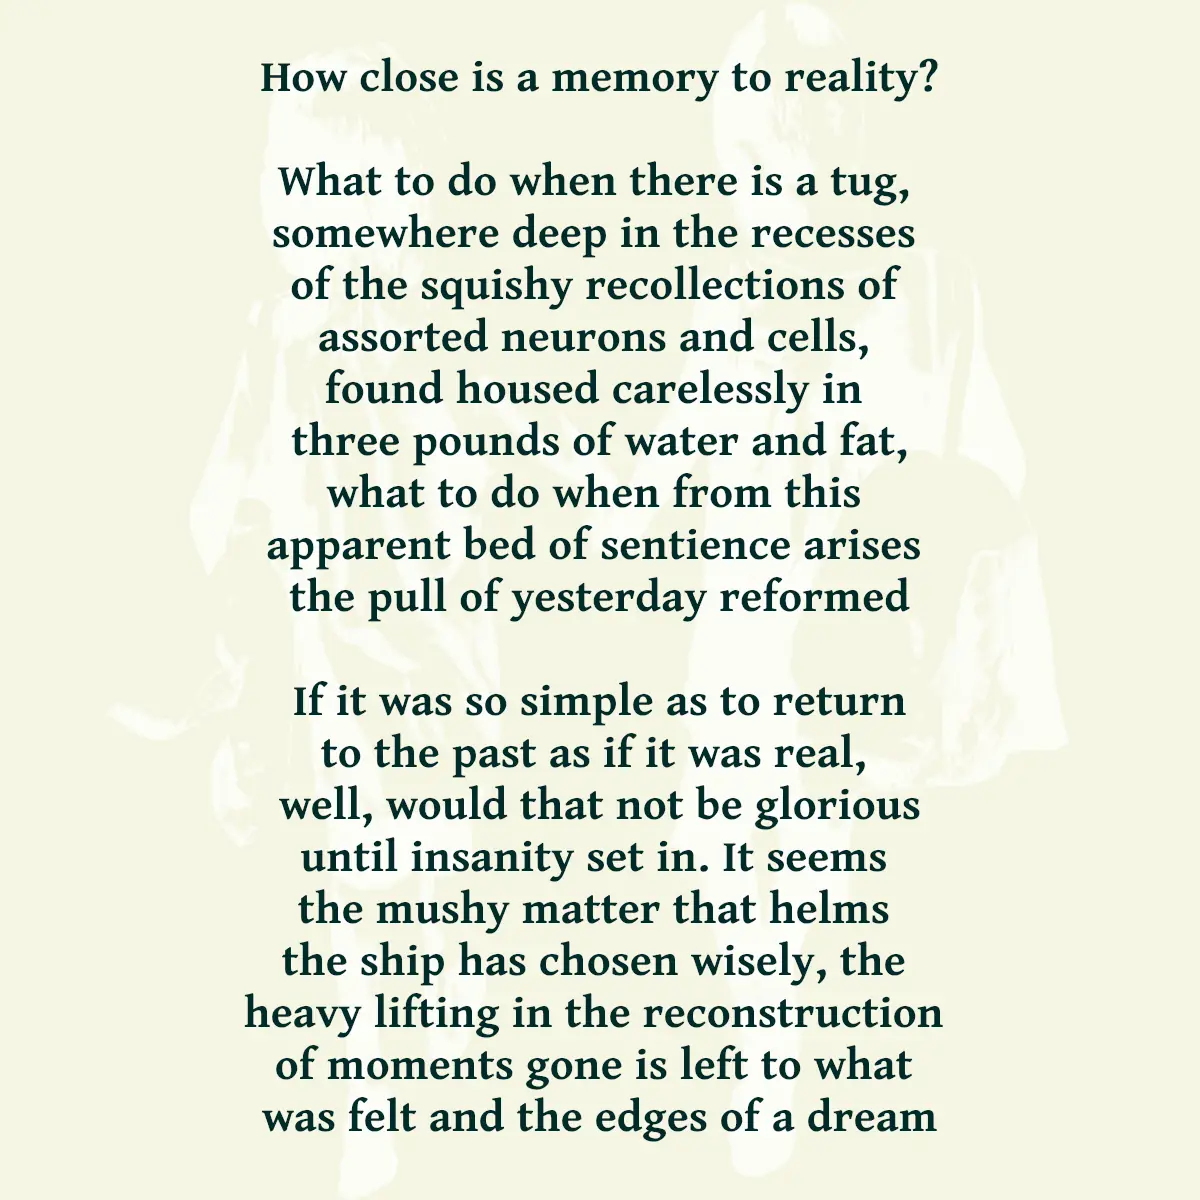 How close is a memory to reality? What to do when there is a tug, somewhere deep in the recesses of the squishy recollections of assorted neurons and cells, found housed carelessly in three pounds of water and fat, what to do when from this apparent bed of sentience arises the pull of yesterday reformed If it was so simple as to return to the past as if it was real, well, would that not be glorious until insanity set in. It seems the mushy matter that helms the ship has chosen wisely, the heavy lifting in the reconstruction of moments gone is left to what was felt and the edges of a dream